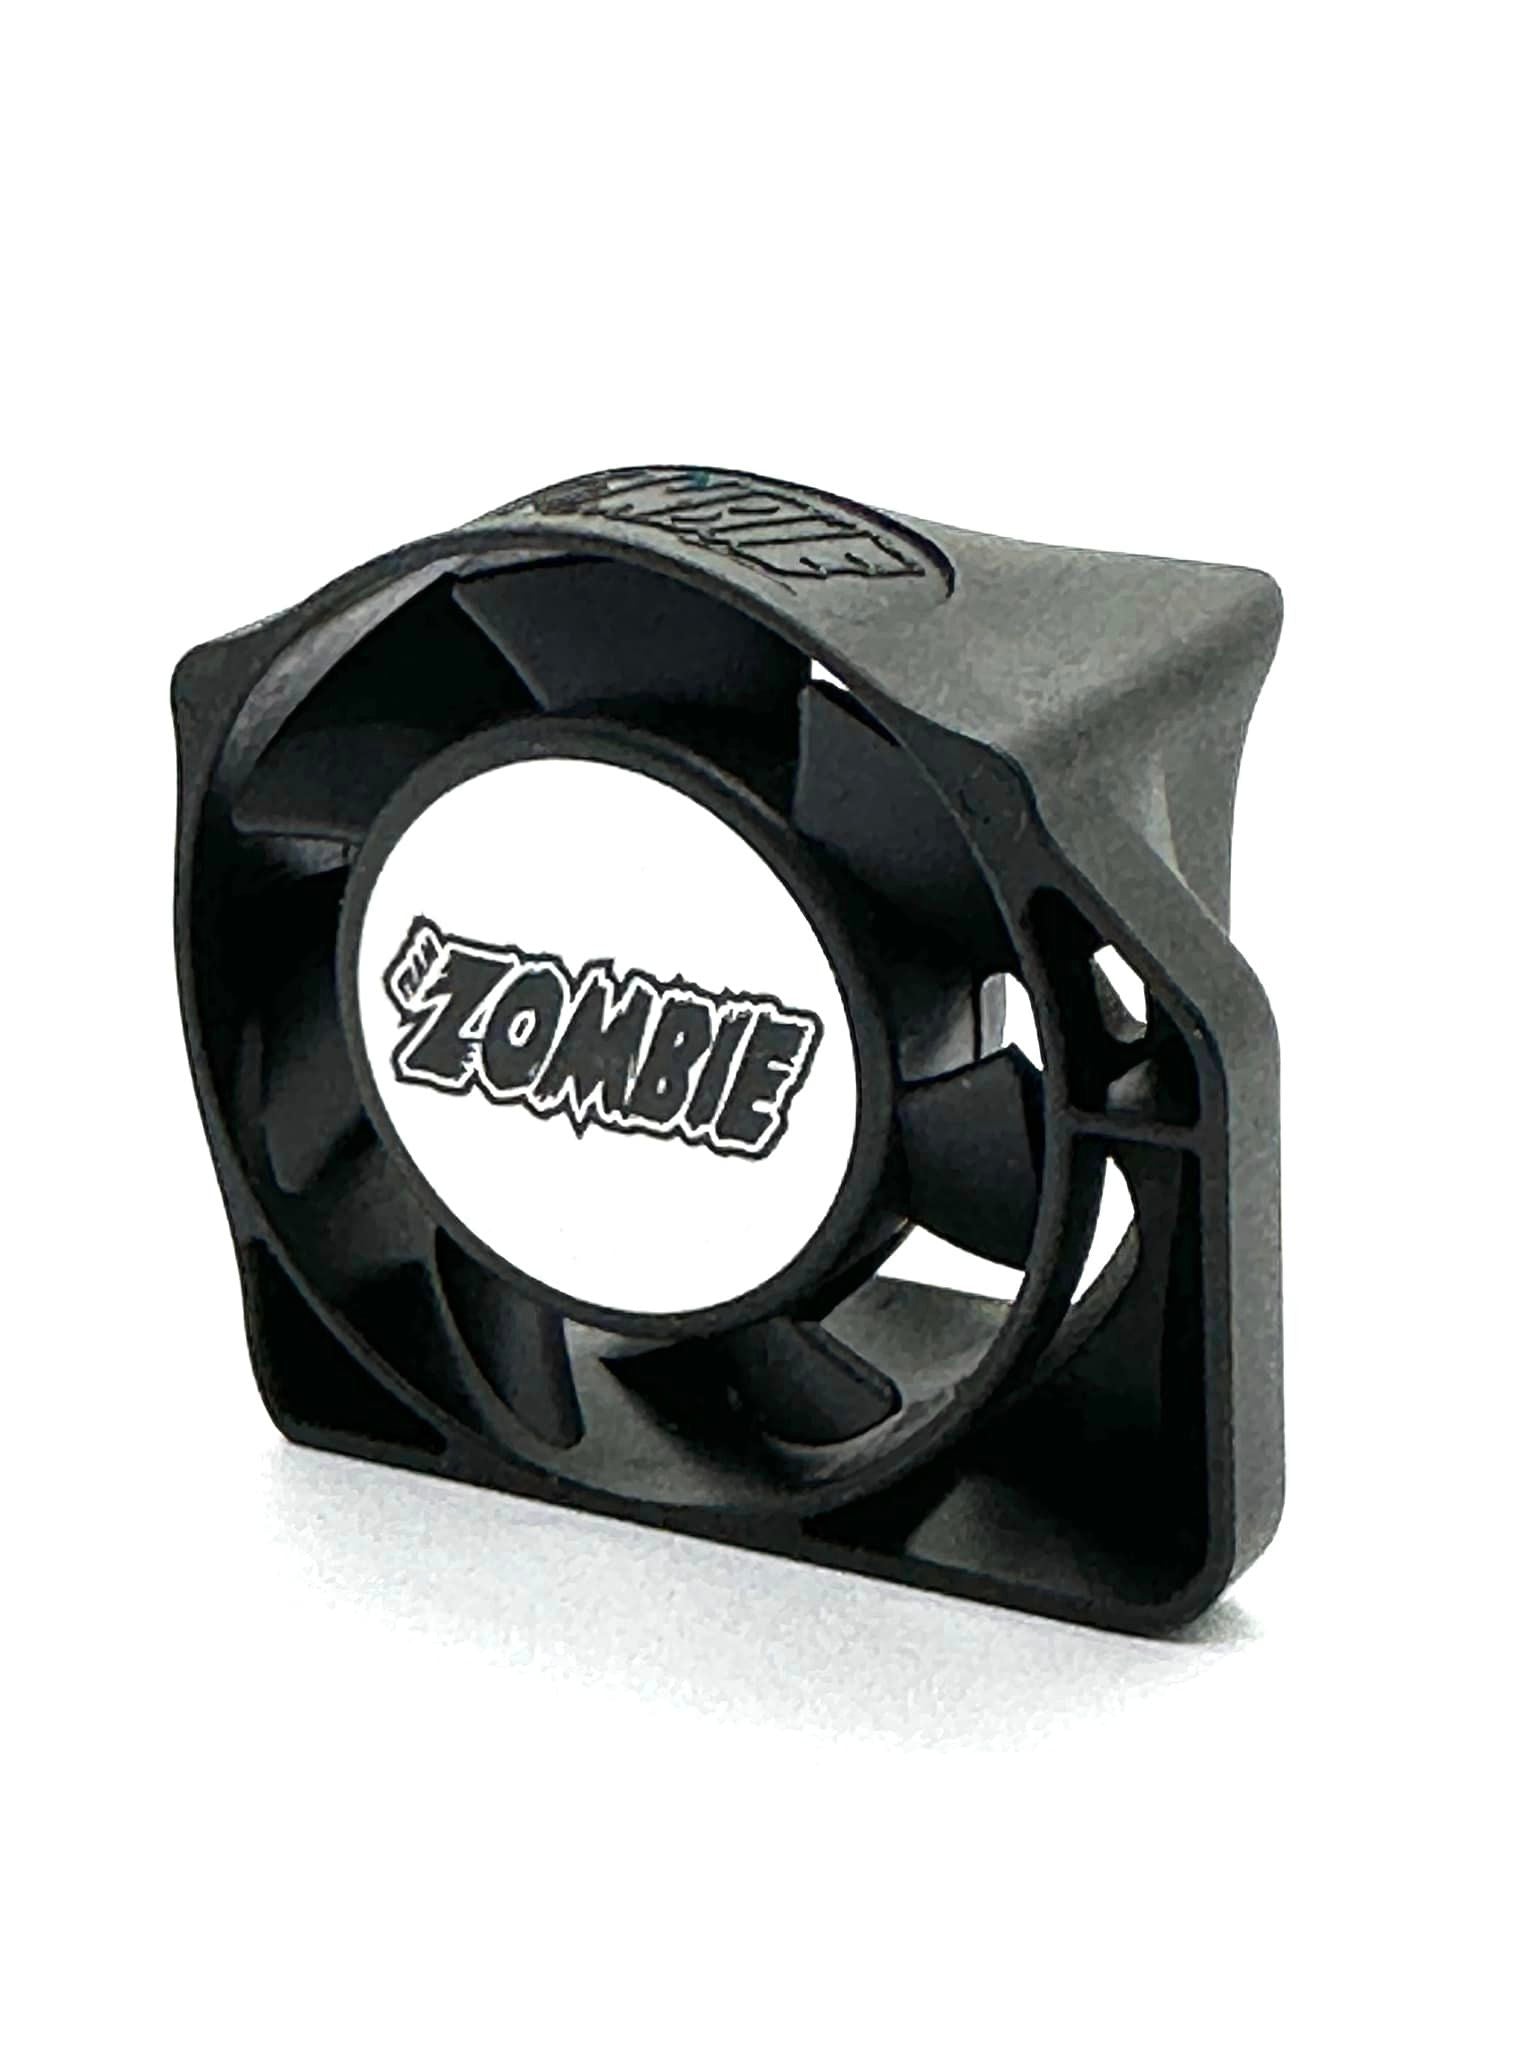 Hollow Evolution Intake Cooling System 40mm Wide Body Air Intake Design